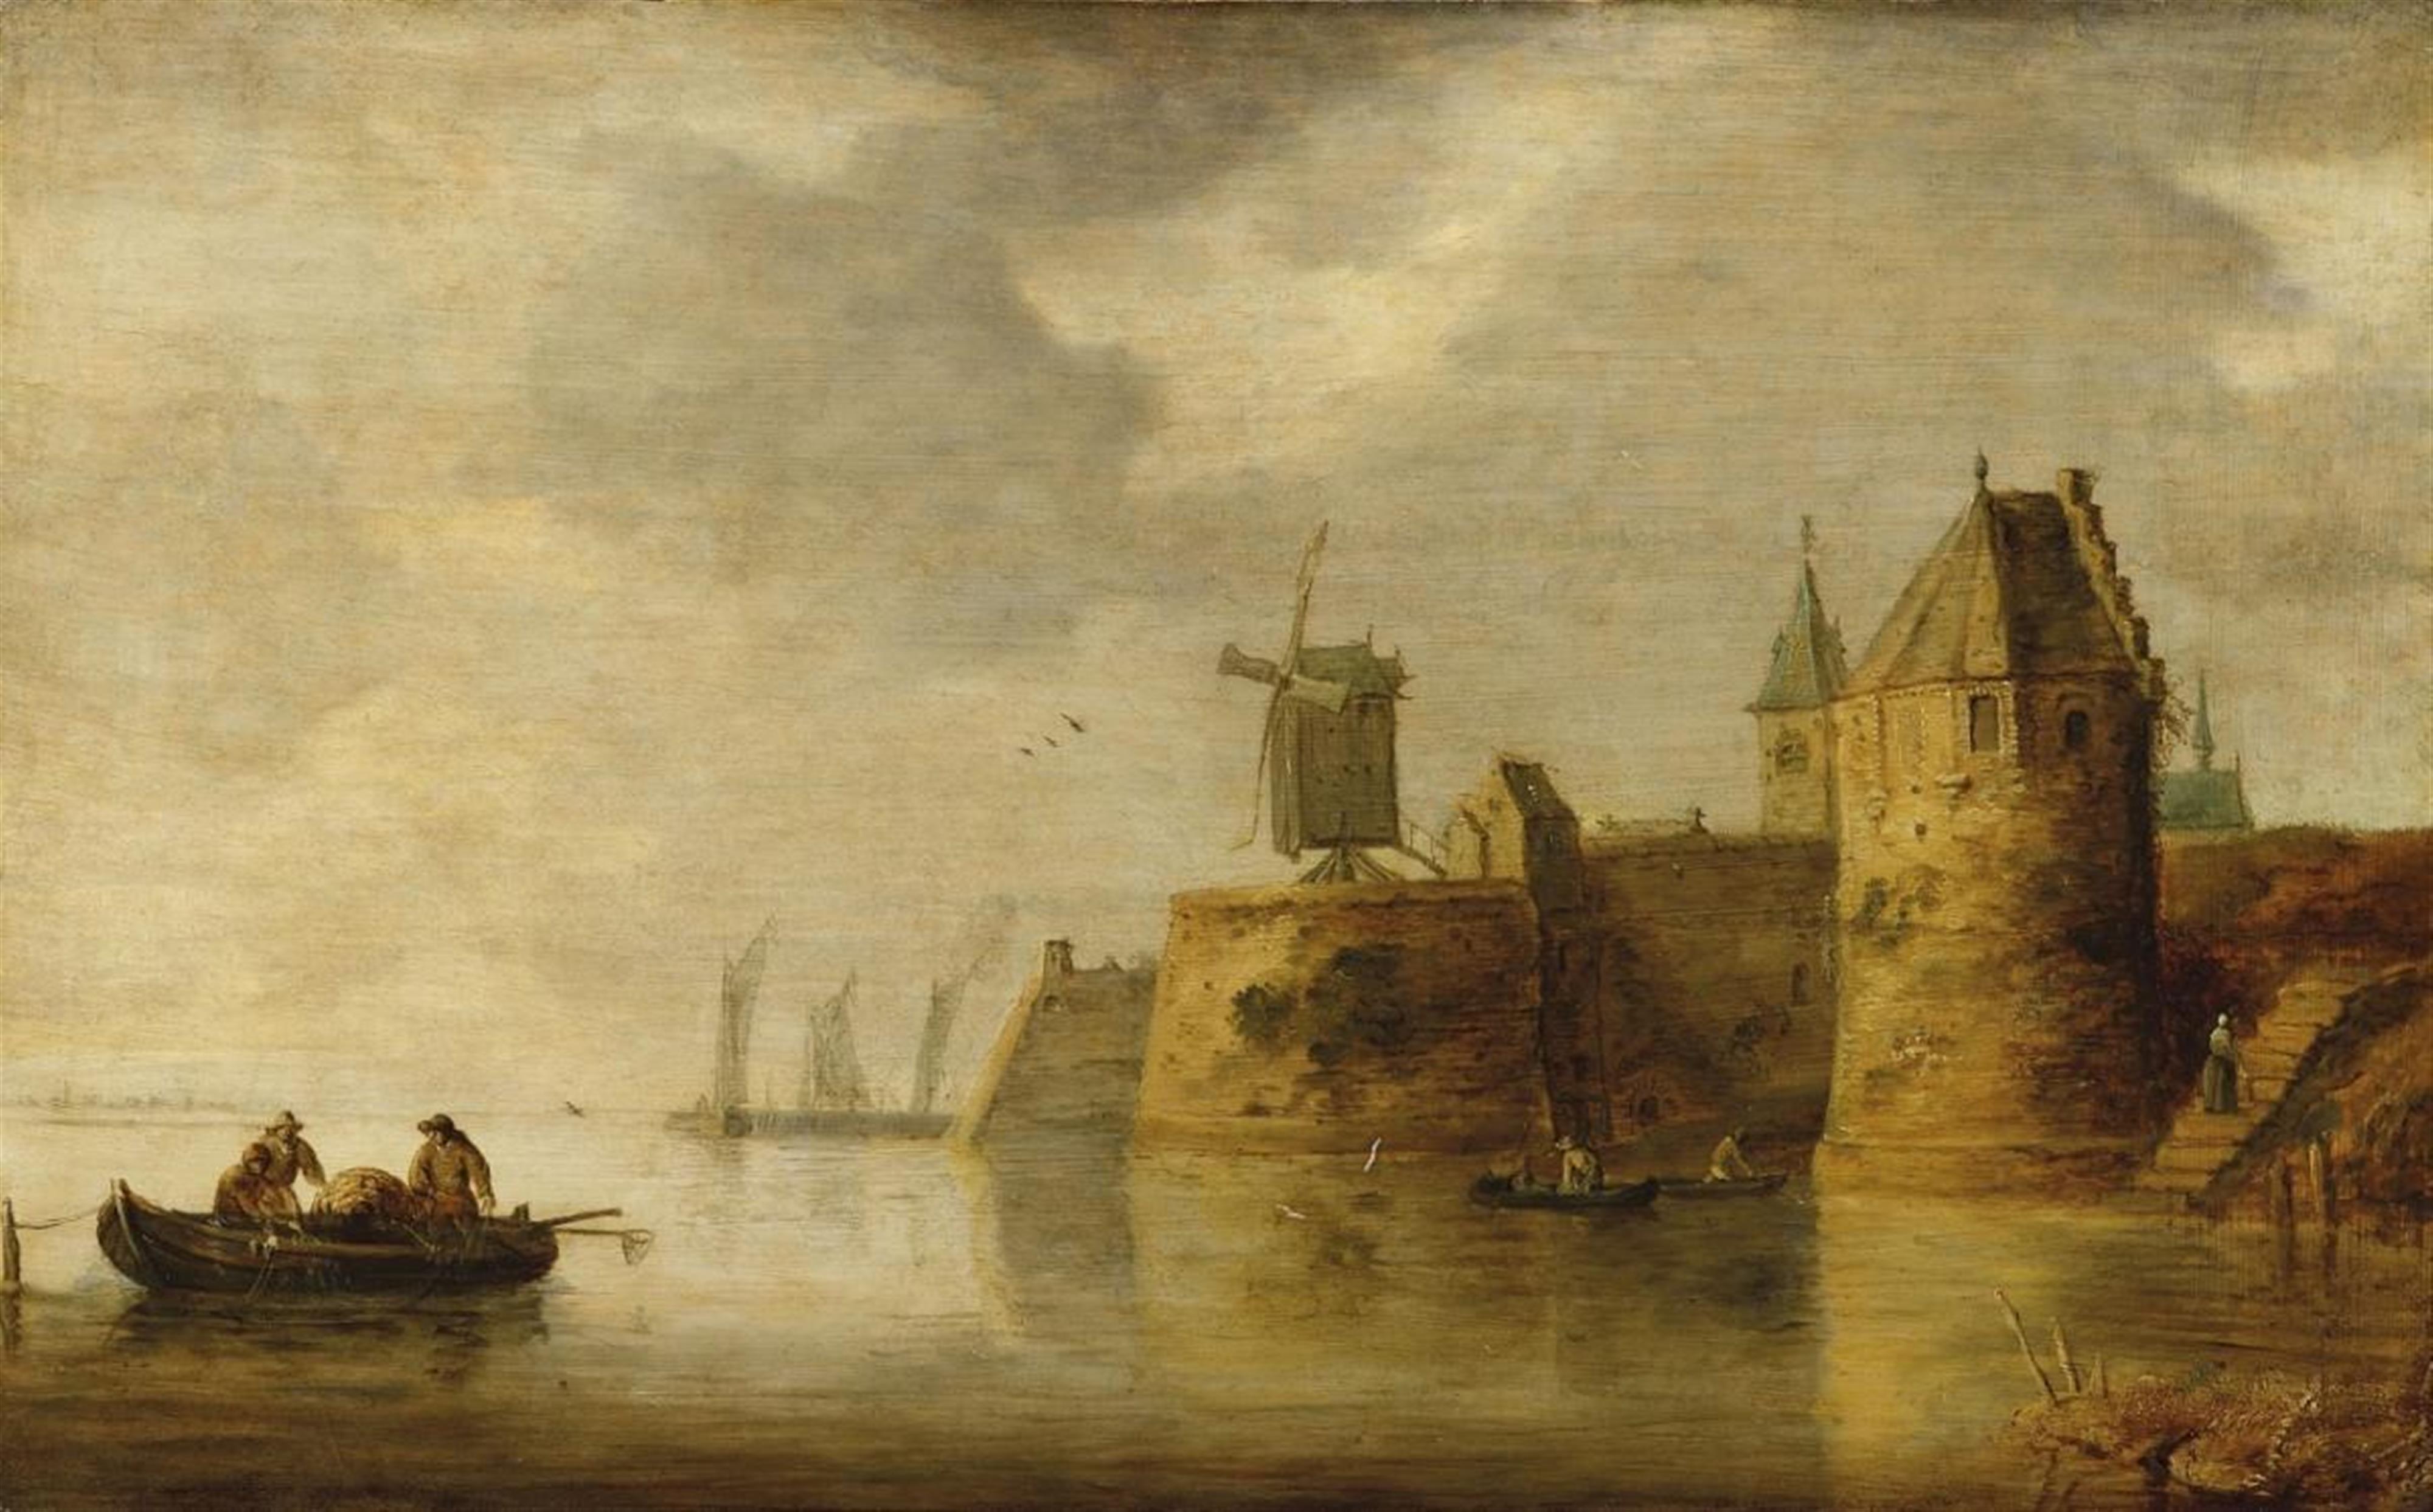 Frans de Hulst - RIVER LANDSCAPE WITH WIND-MILL AND BOATS - image-1